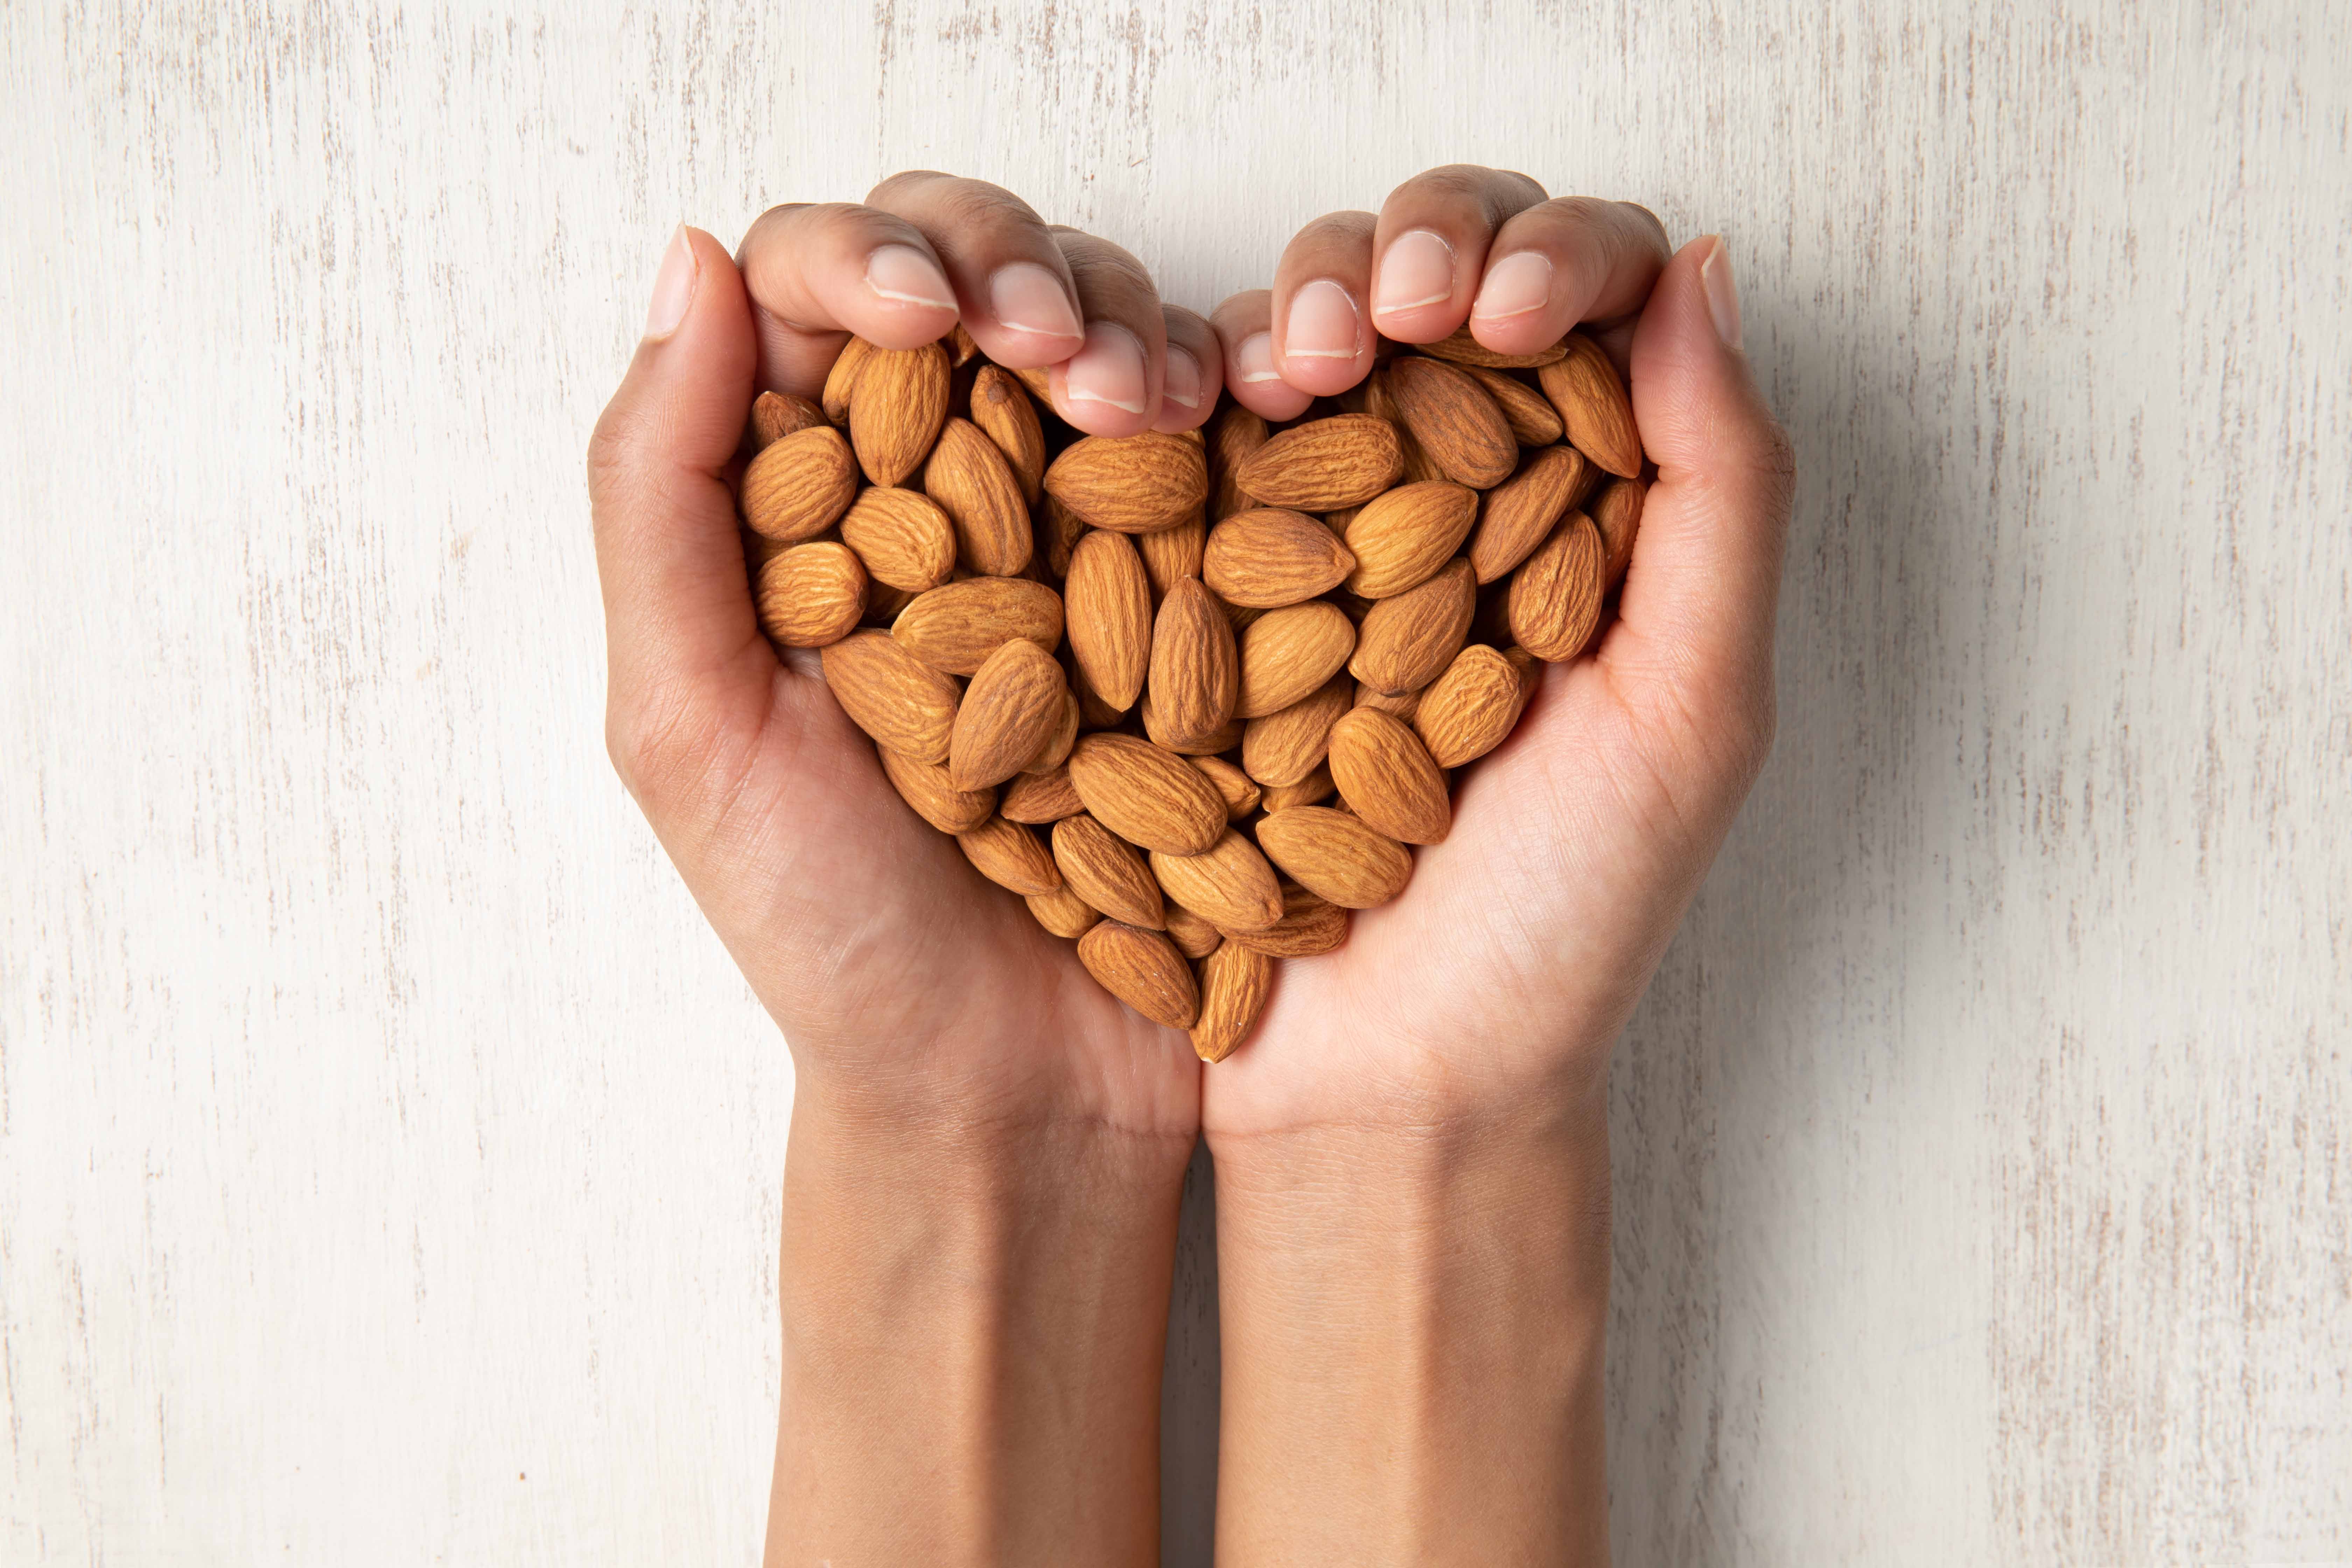 Survey Says: Almonds May be the Common Denominator to All the Best Wellness Routines